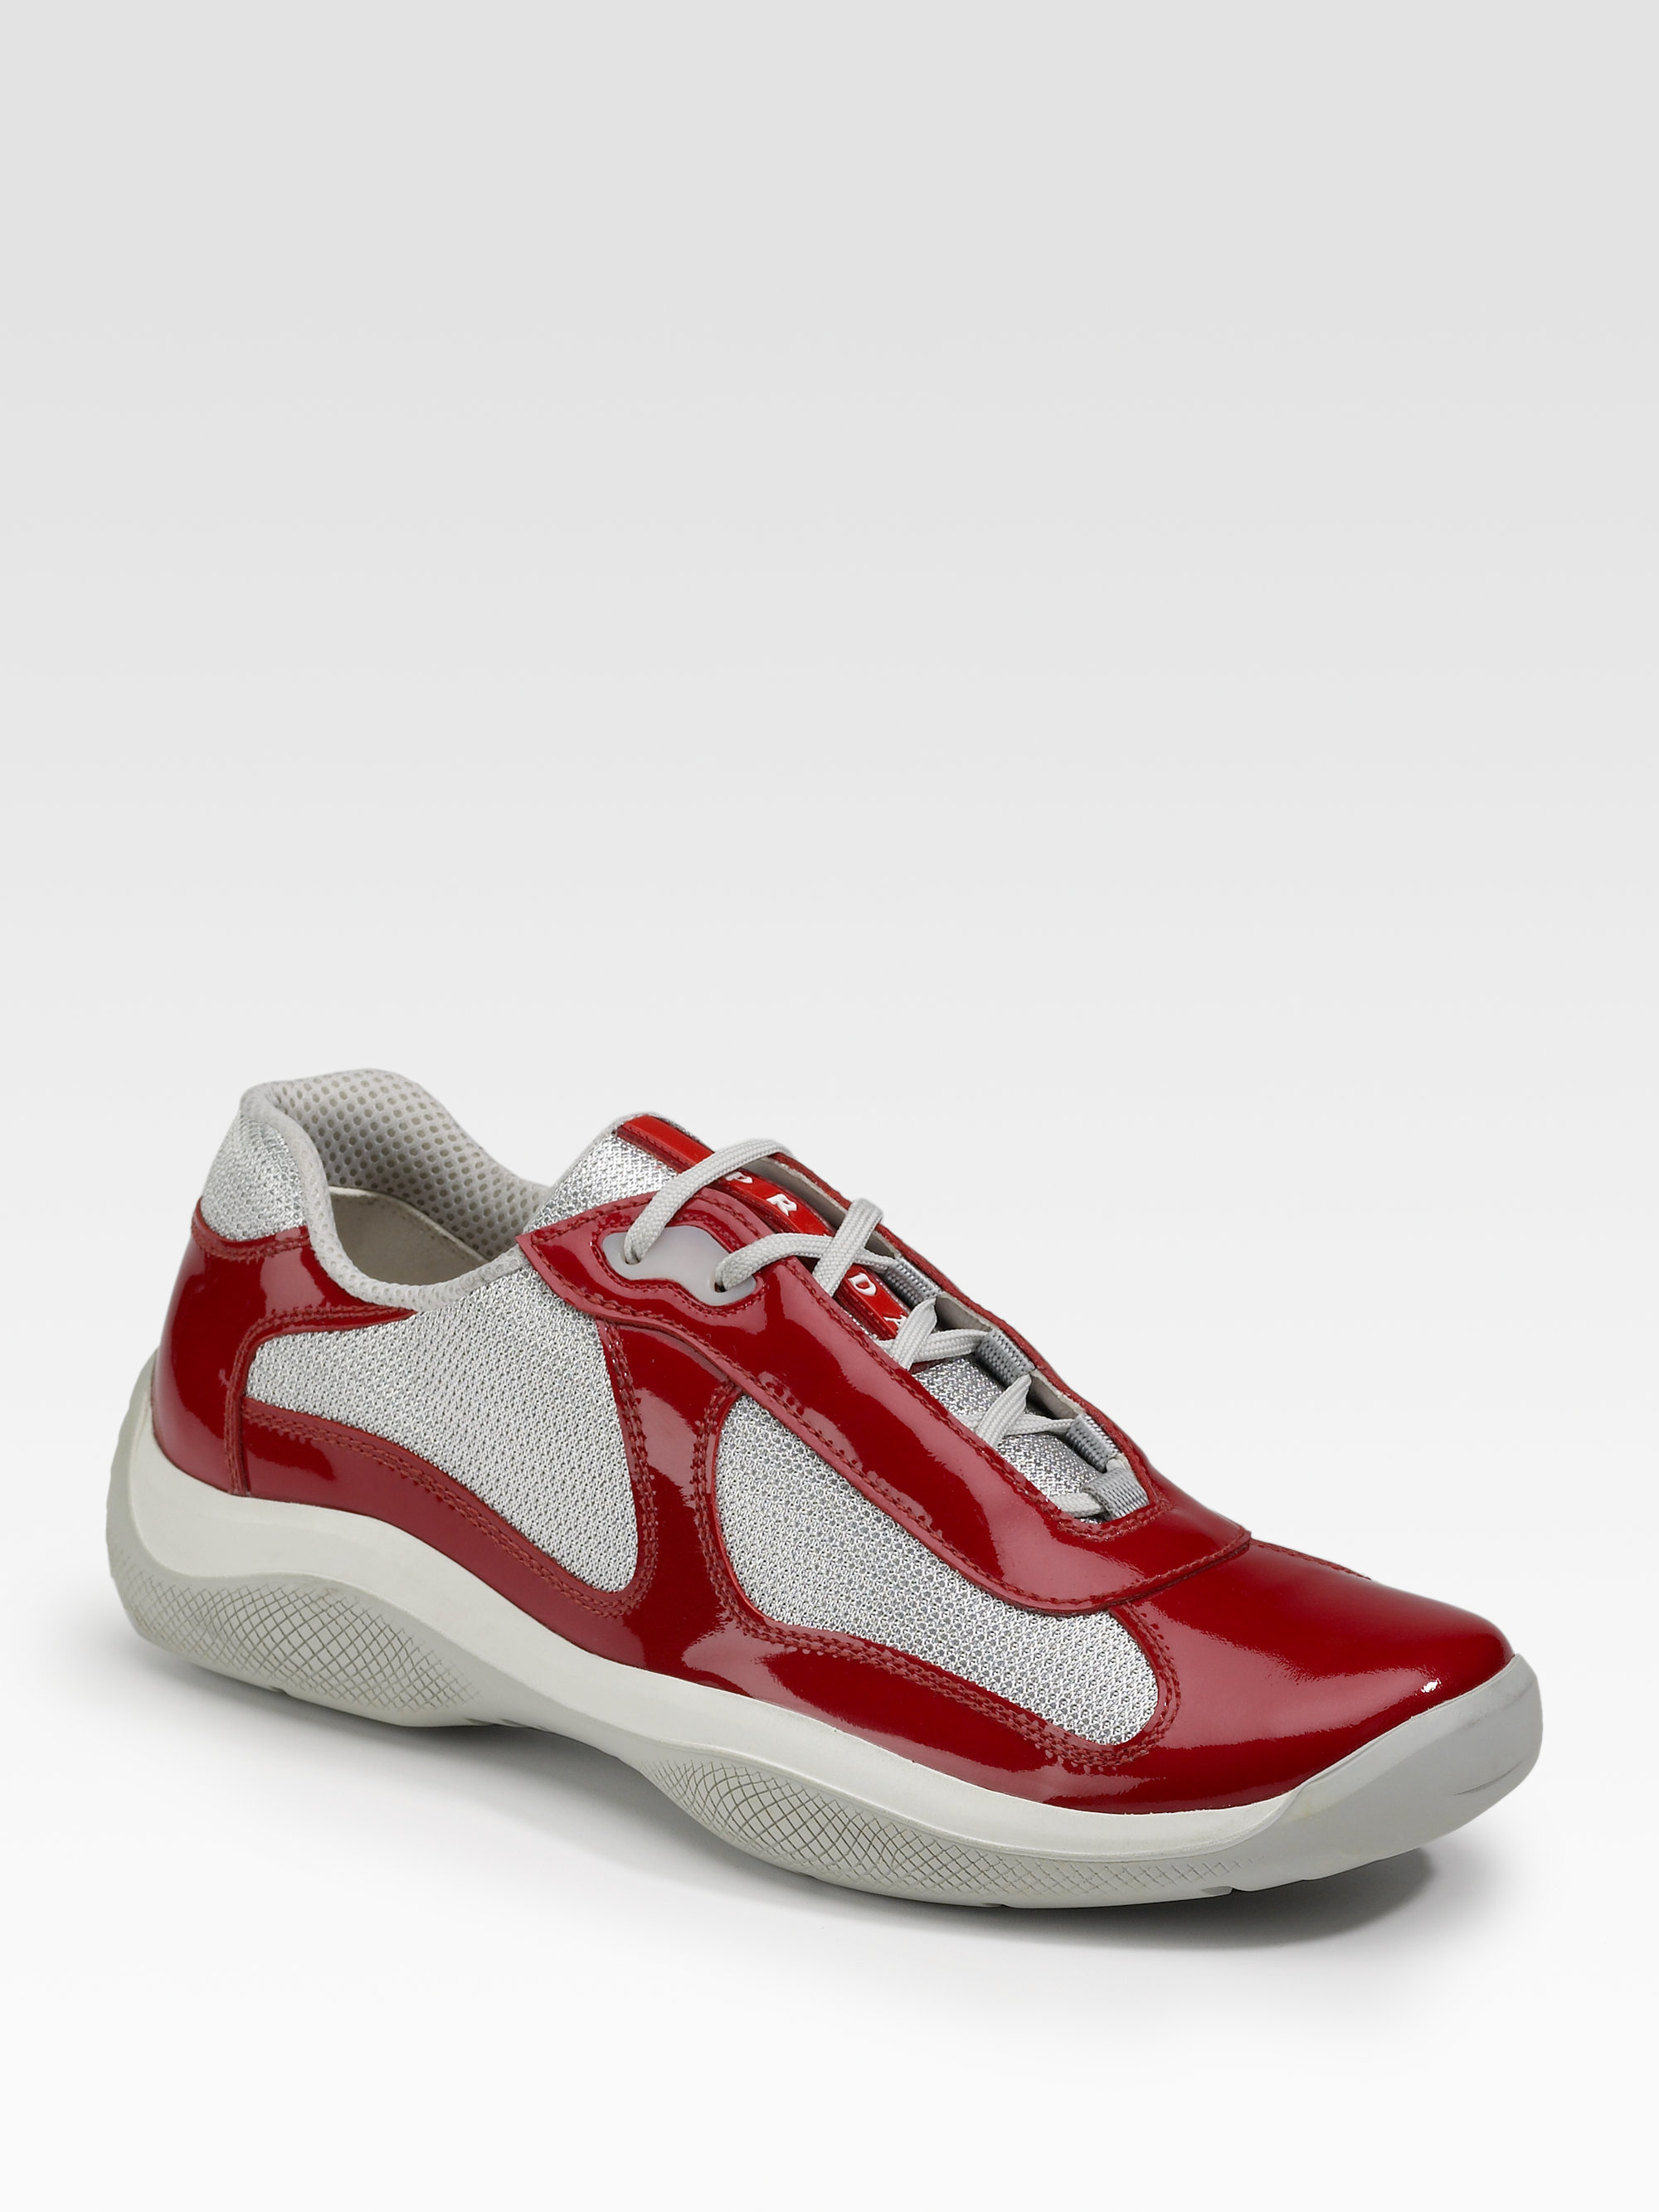 prada red patent leather shoes